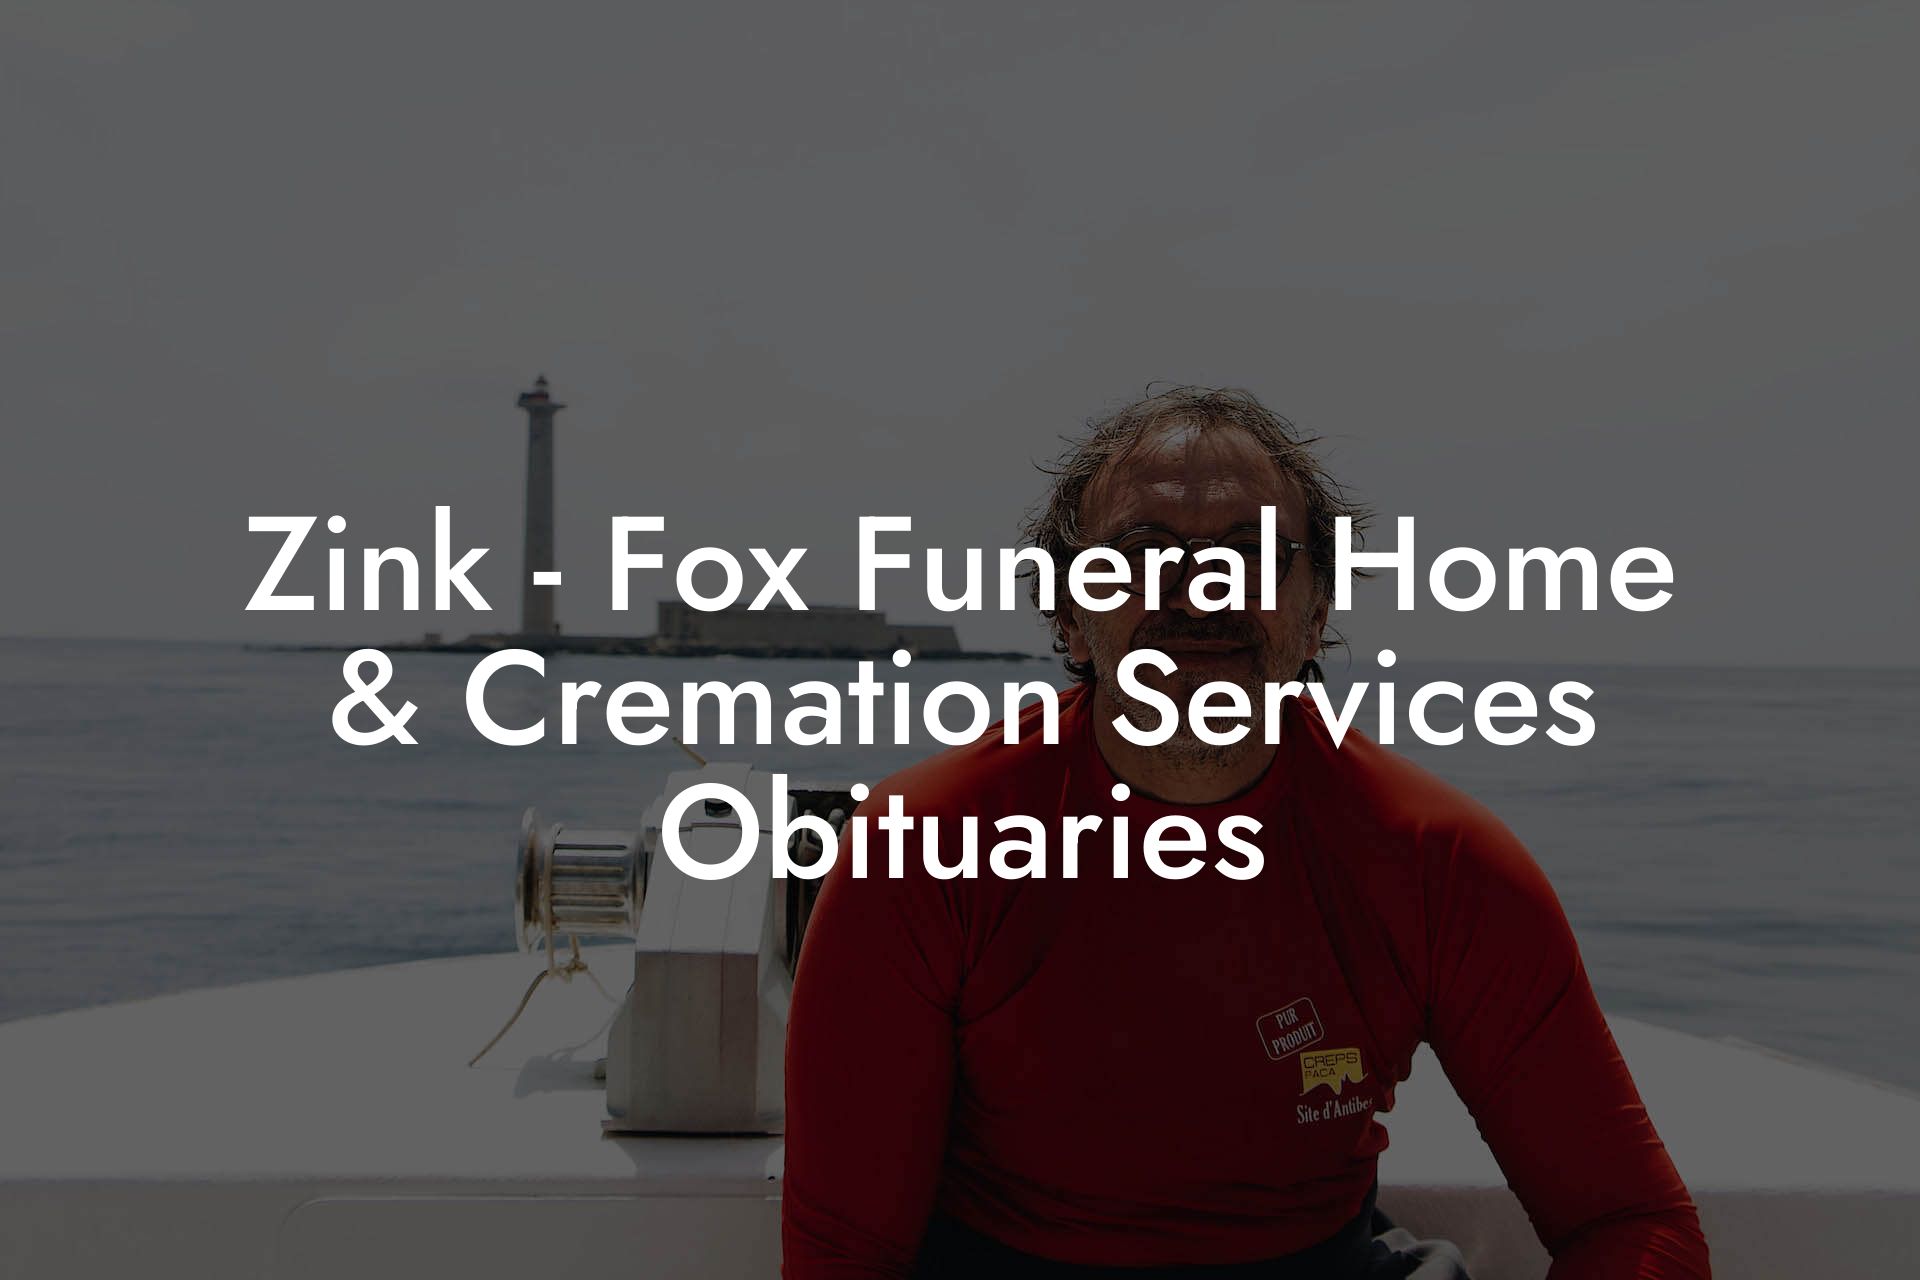 Zink - Fox Funeral Home & Cremation Services Obituaries